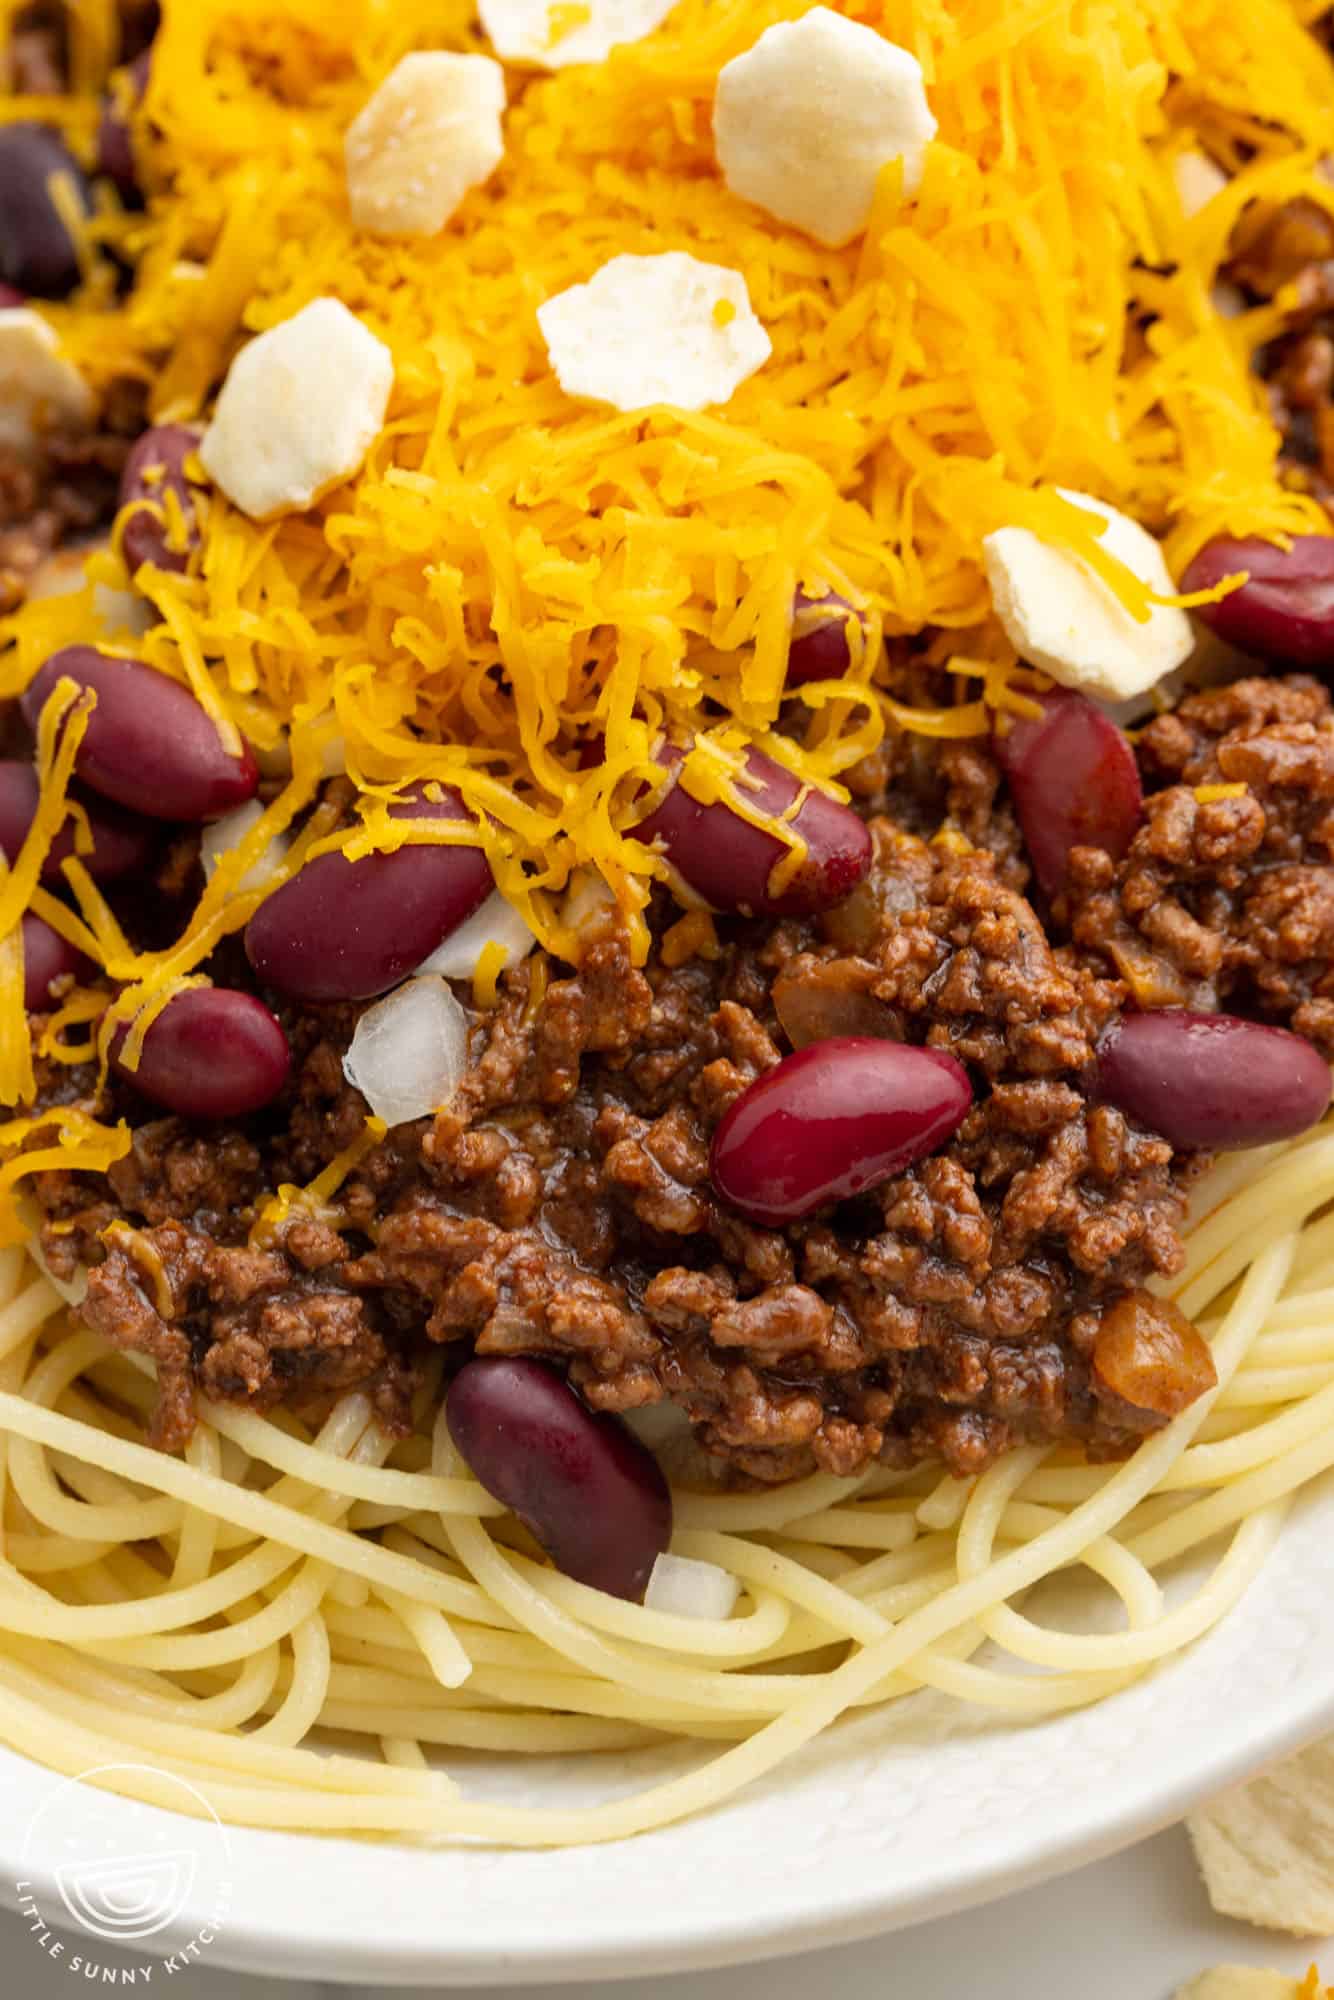 a plate of spaghetti with cincinnati chili, topped with cheese and crackers.